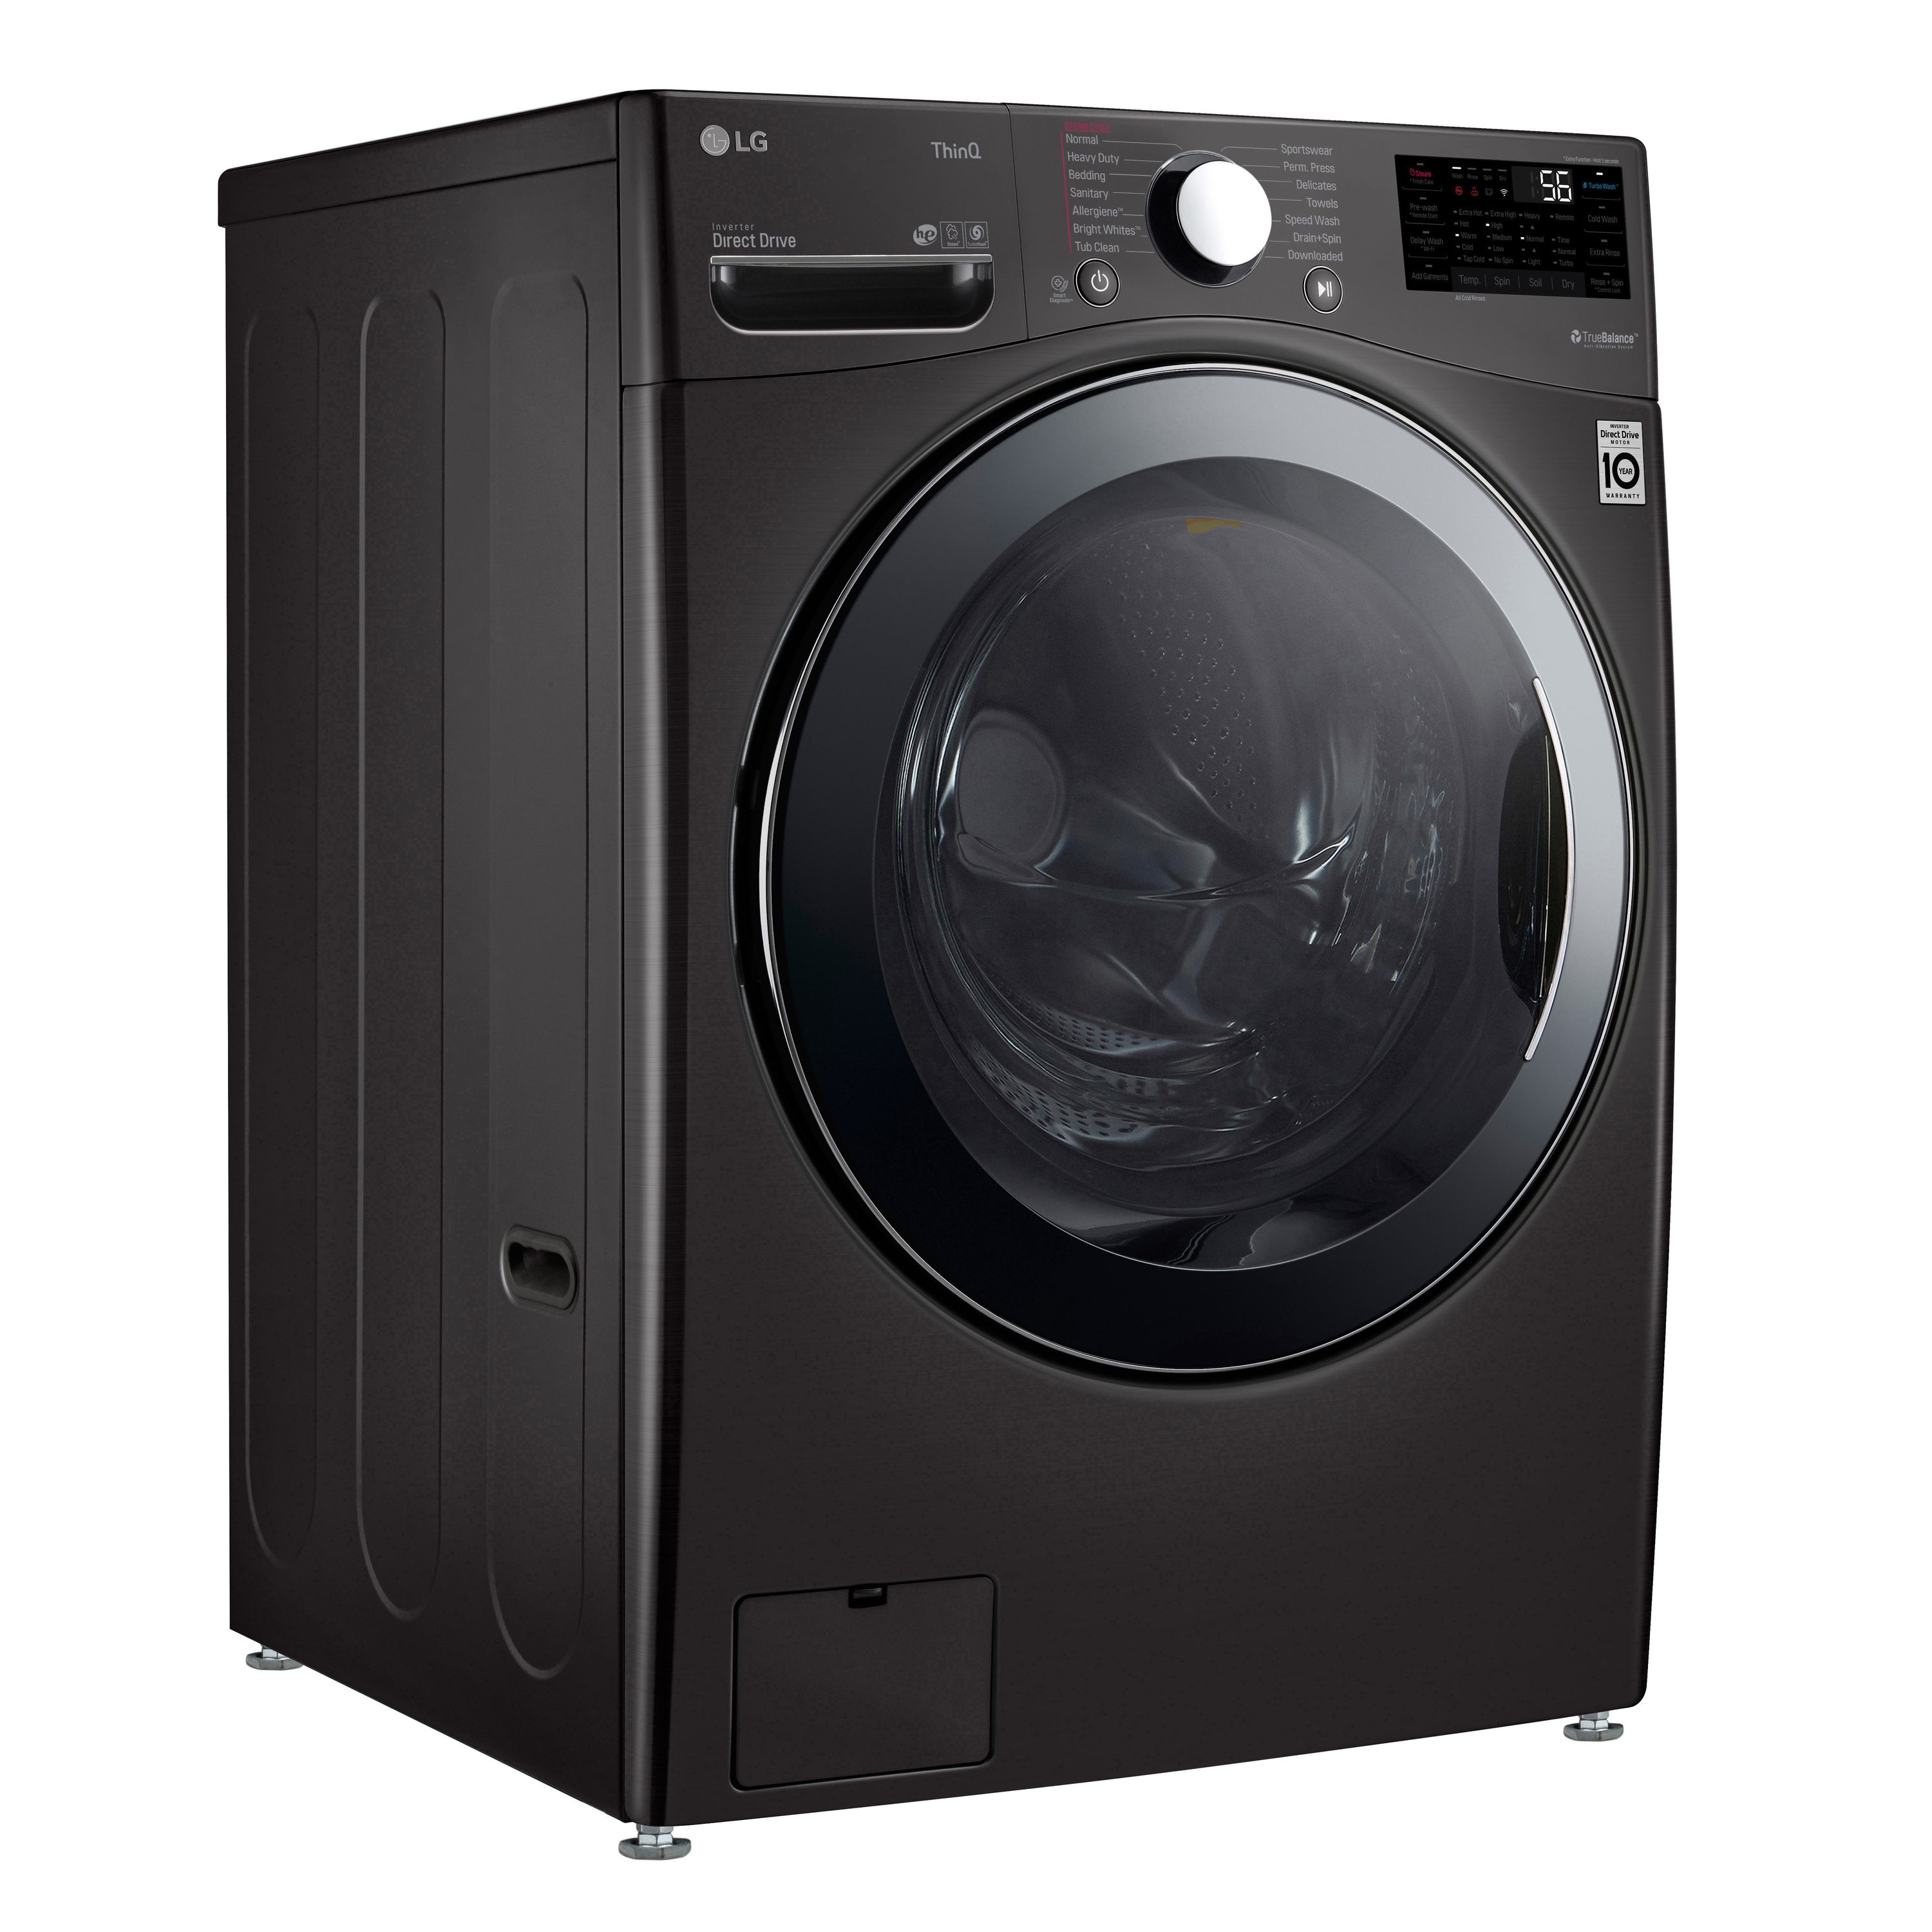 LG 4.5-cu ft Capacity Black Steel Ventless All-in-One Washer/Dryer